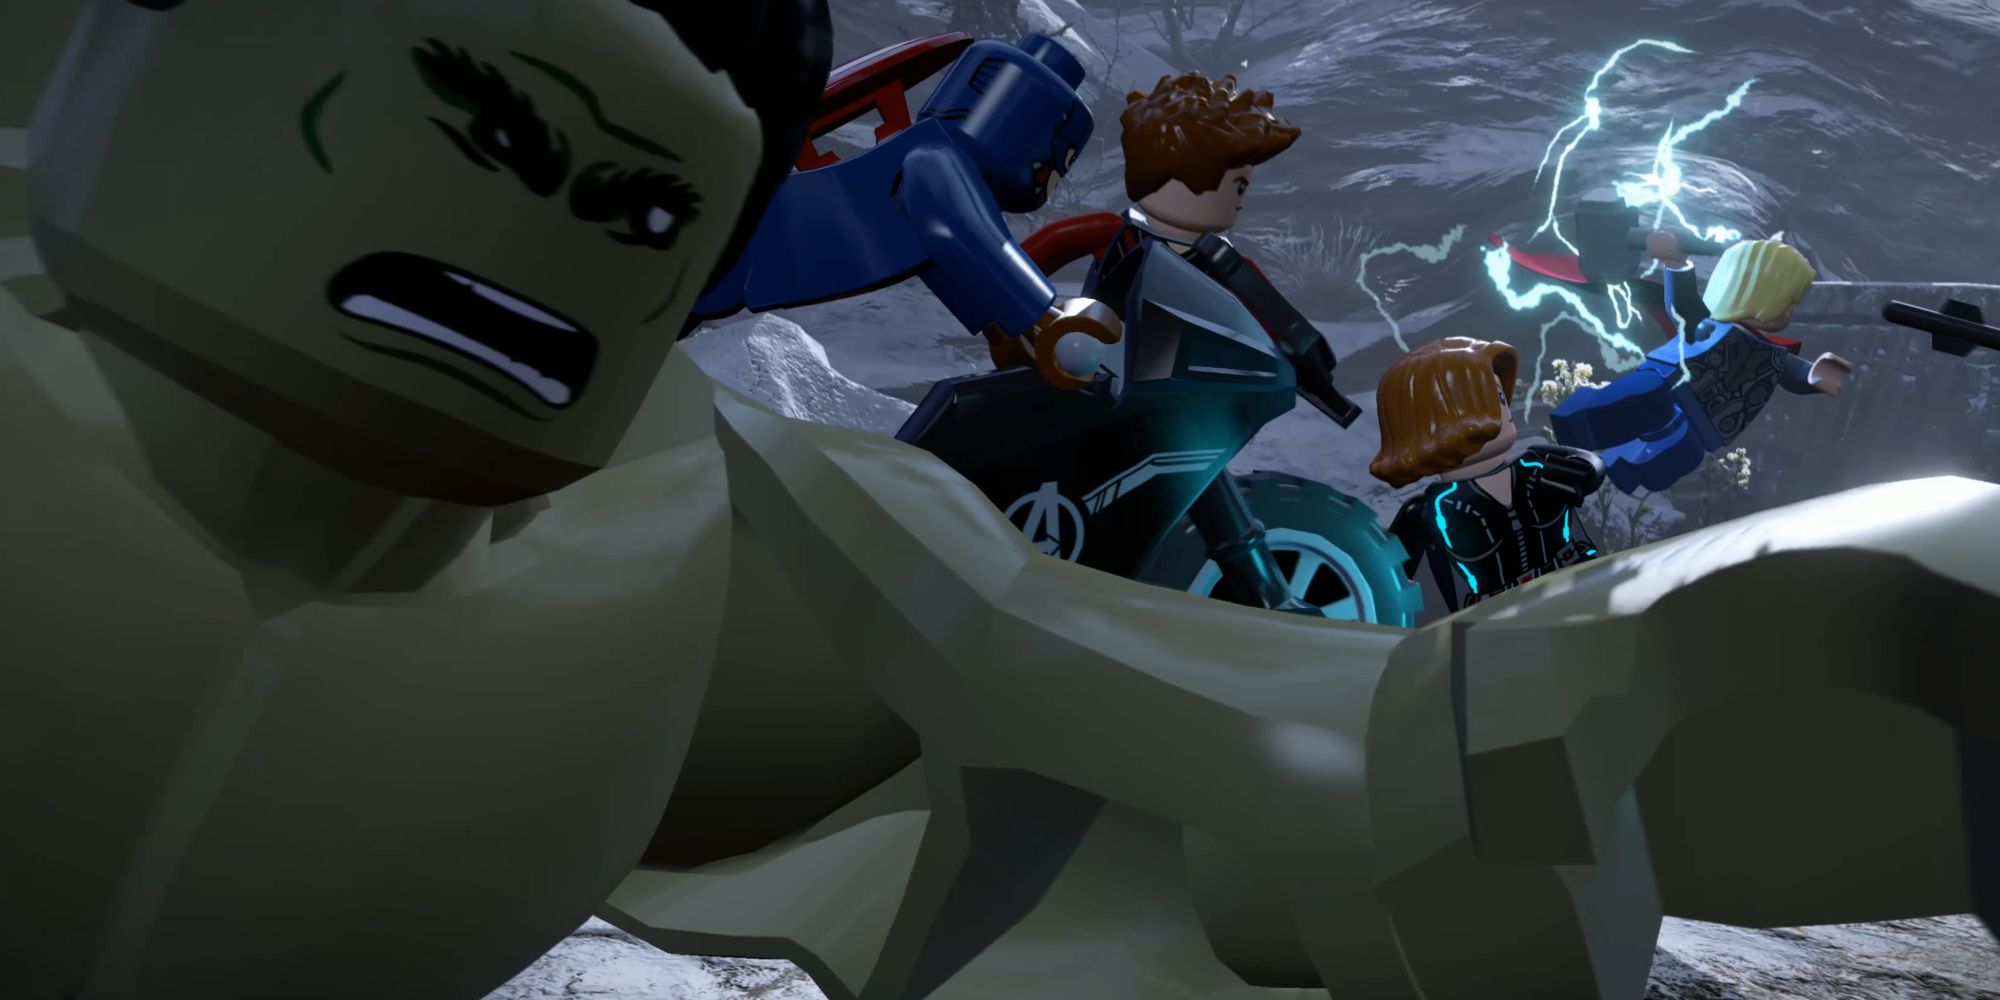 The Avengers leaping into battle in LEGO Marvels Avengers